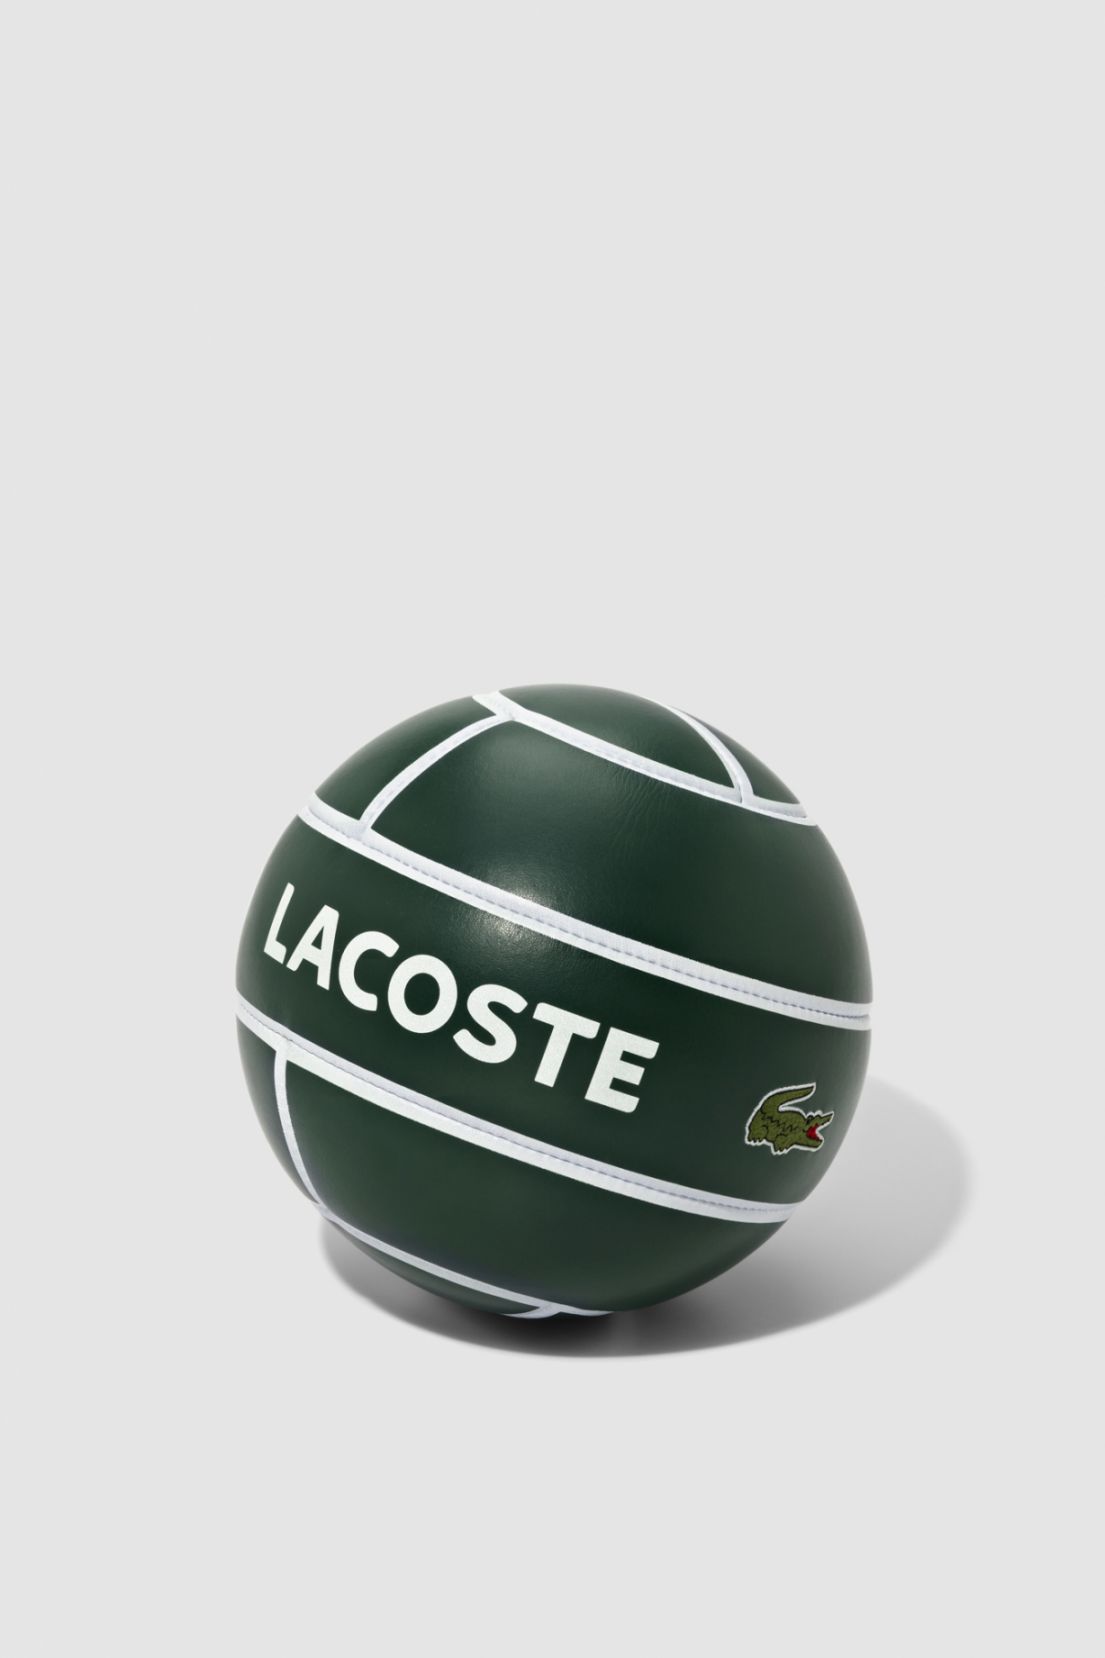 Lacoste Lab products